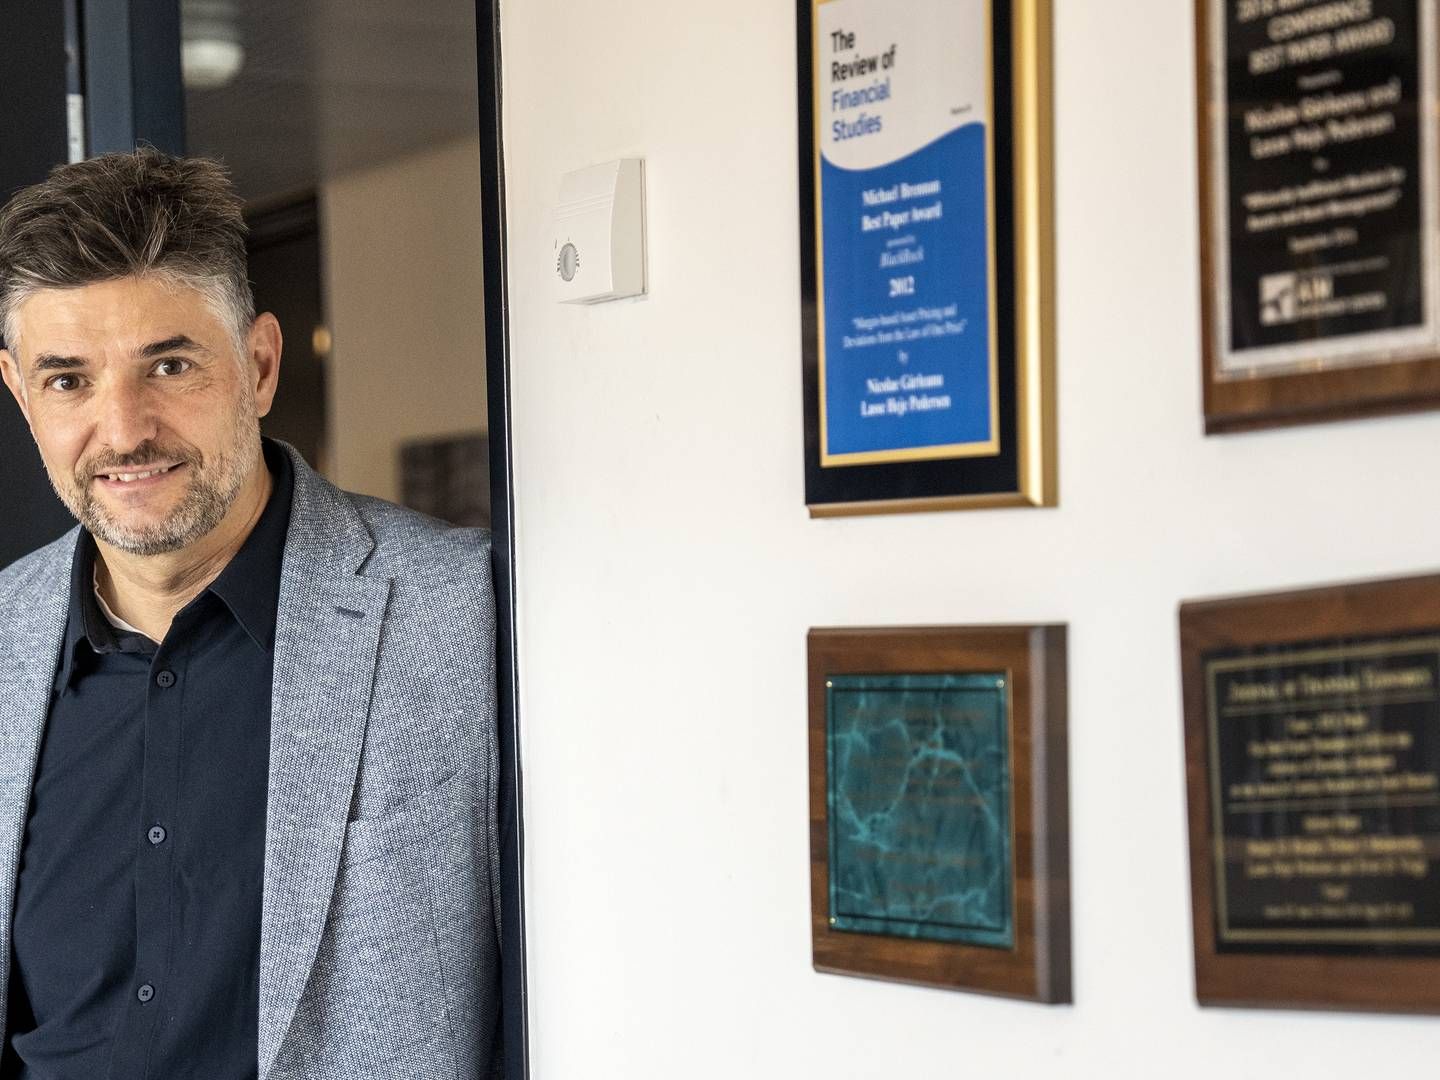 Lasse Heje Pedersen now works at Copenhagen Business School (CBS), where his office is decorated with his various awards and plaques. | Photo: Stine Bidstrup/ERH